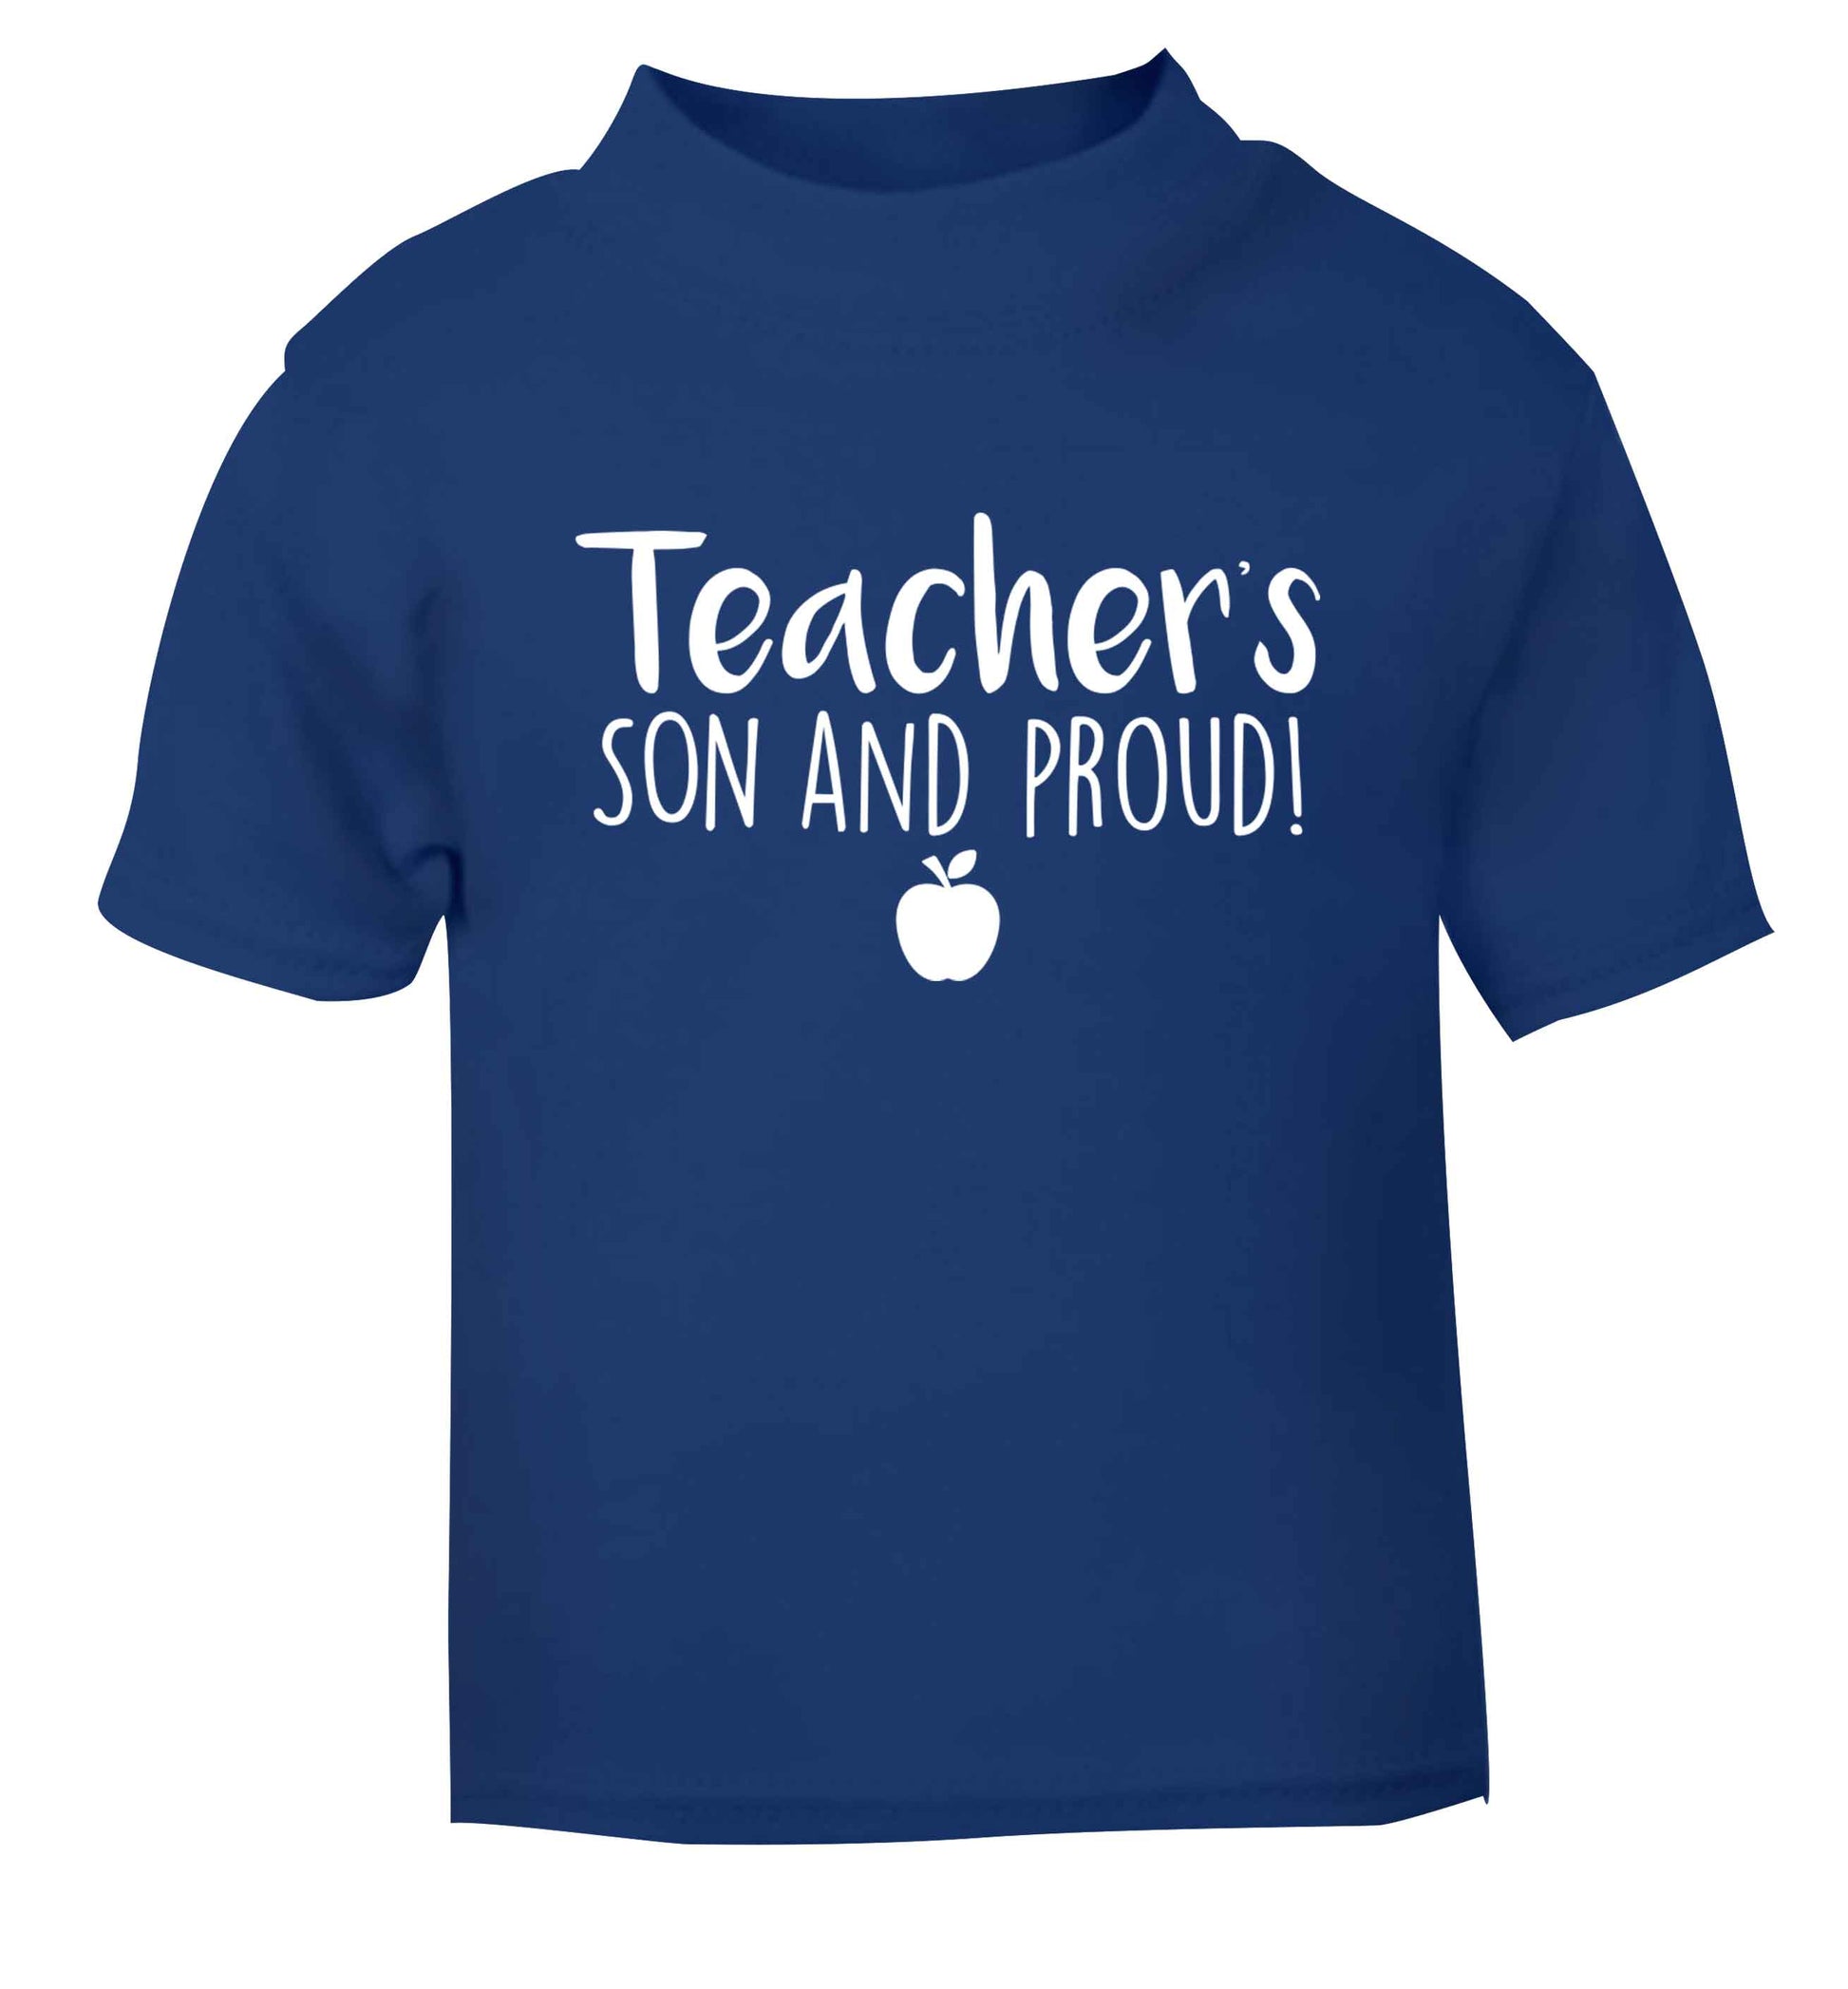 Teachers son and proud blue baby toddler Tshirt 2 Years